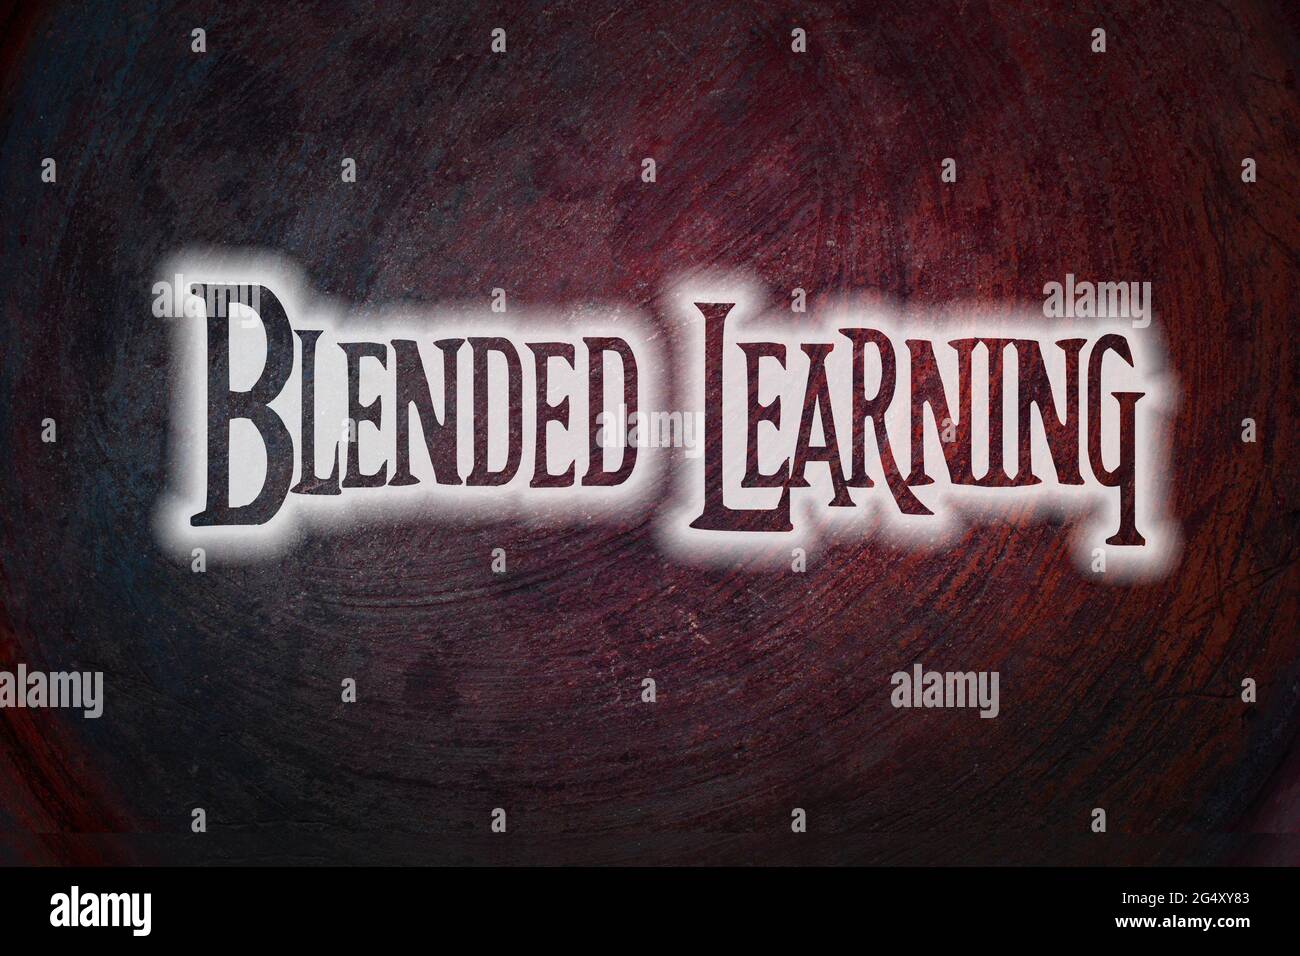 Blended Learning Concept text on background Stock Photo